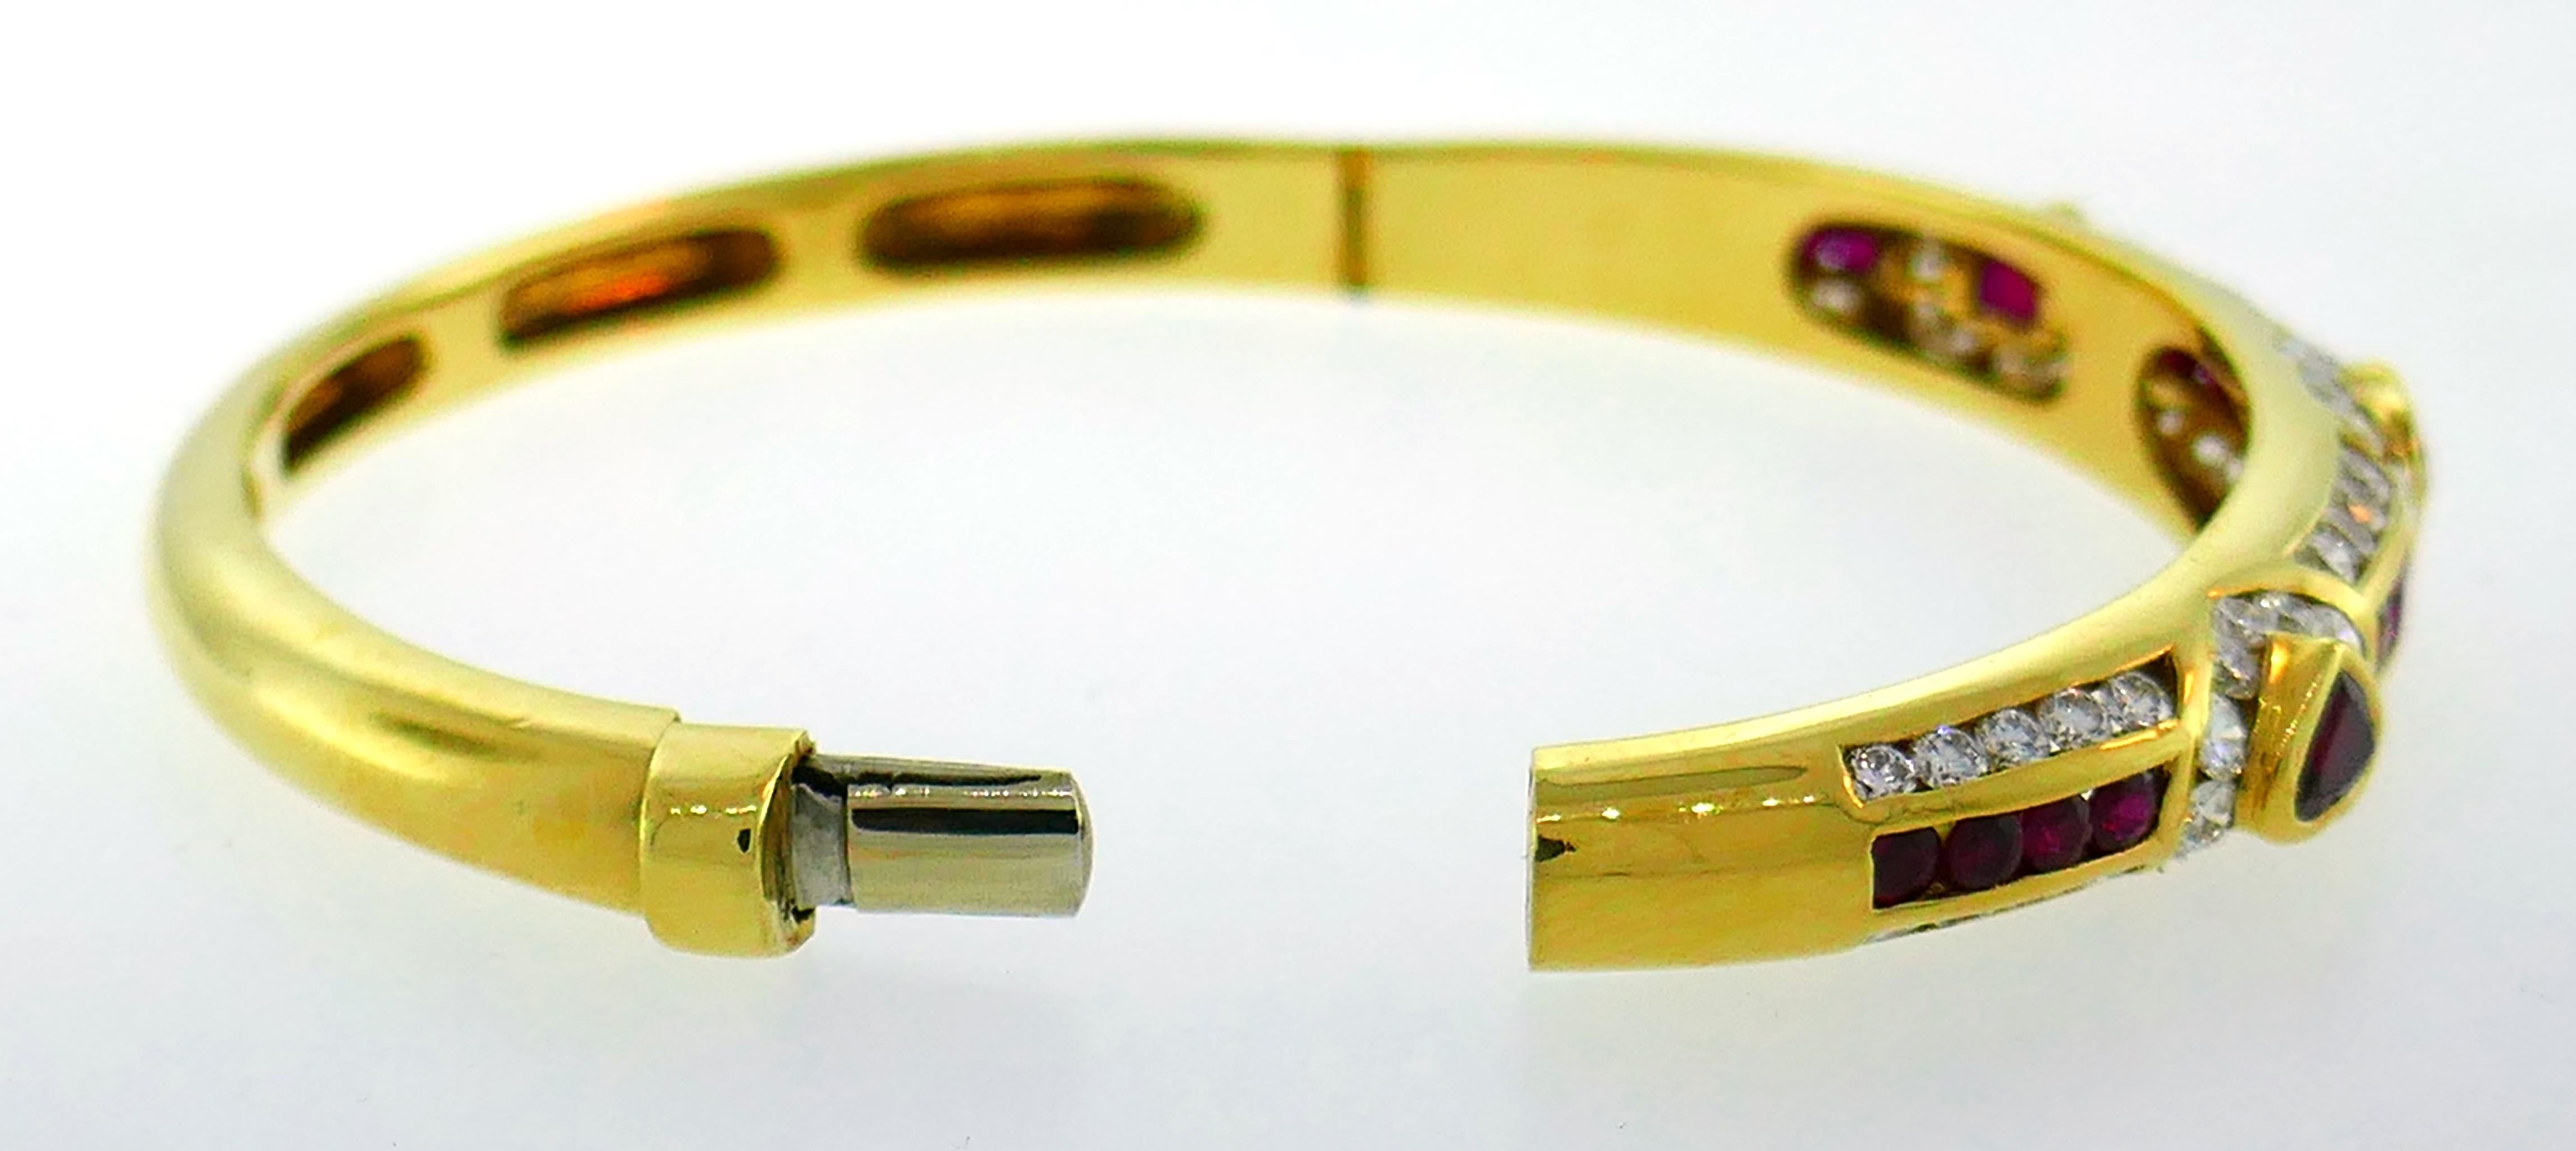 Fred Paris Heart Ruby Yellow Gold Bangle Bracelet with Diamond Accents, 1970s 1